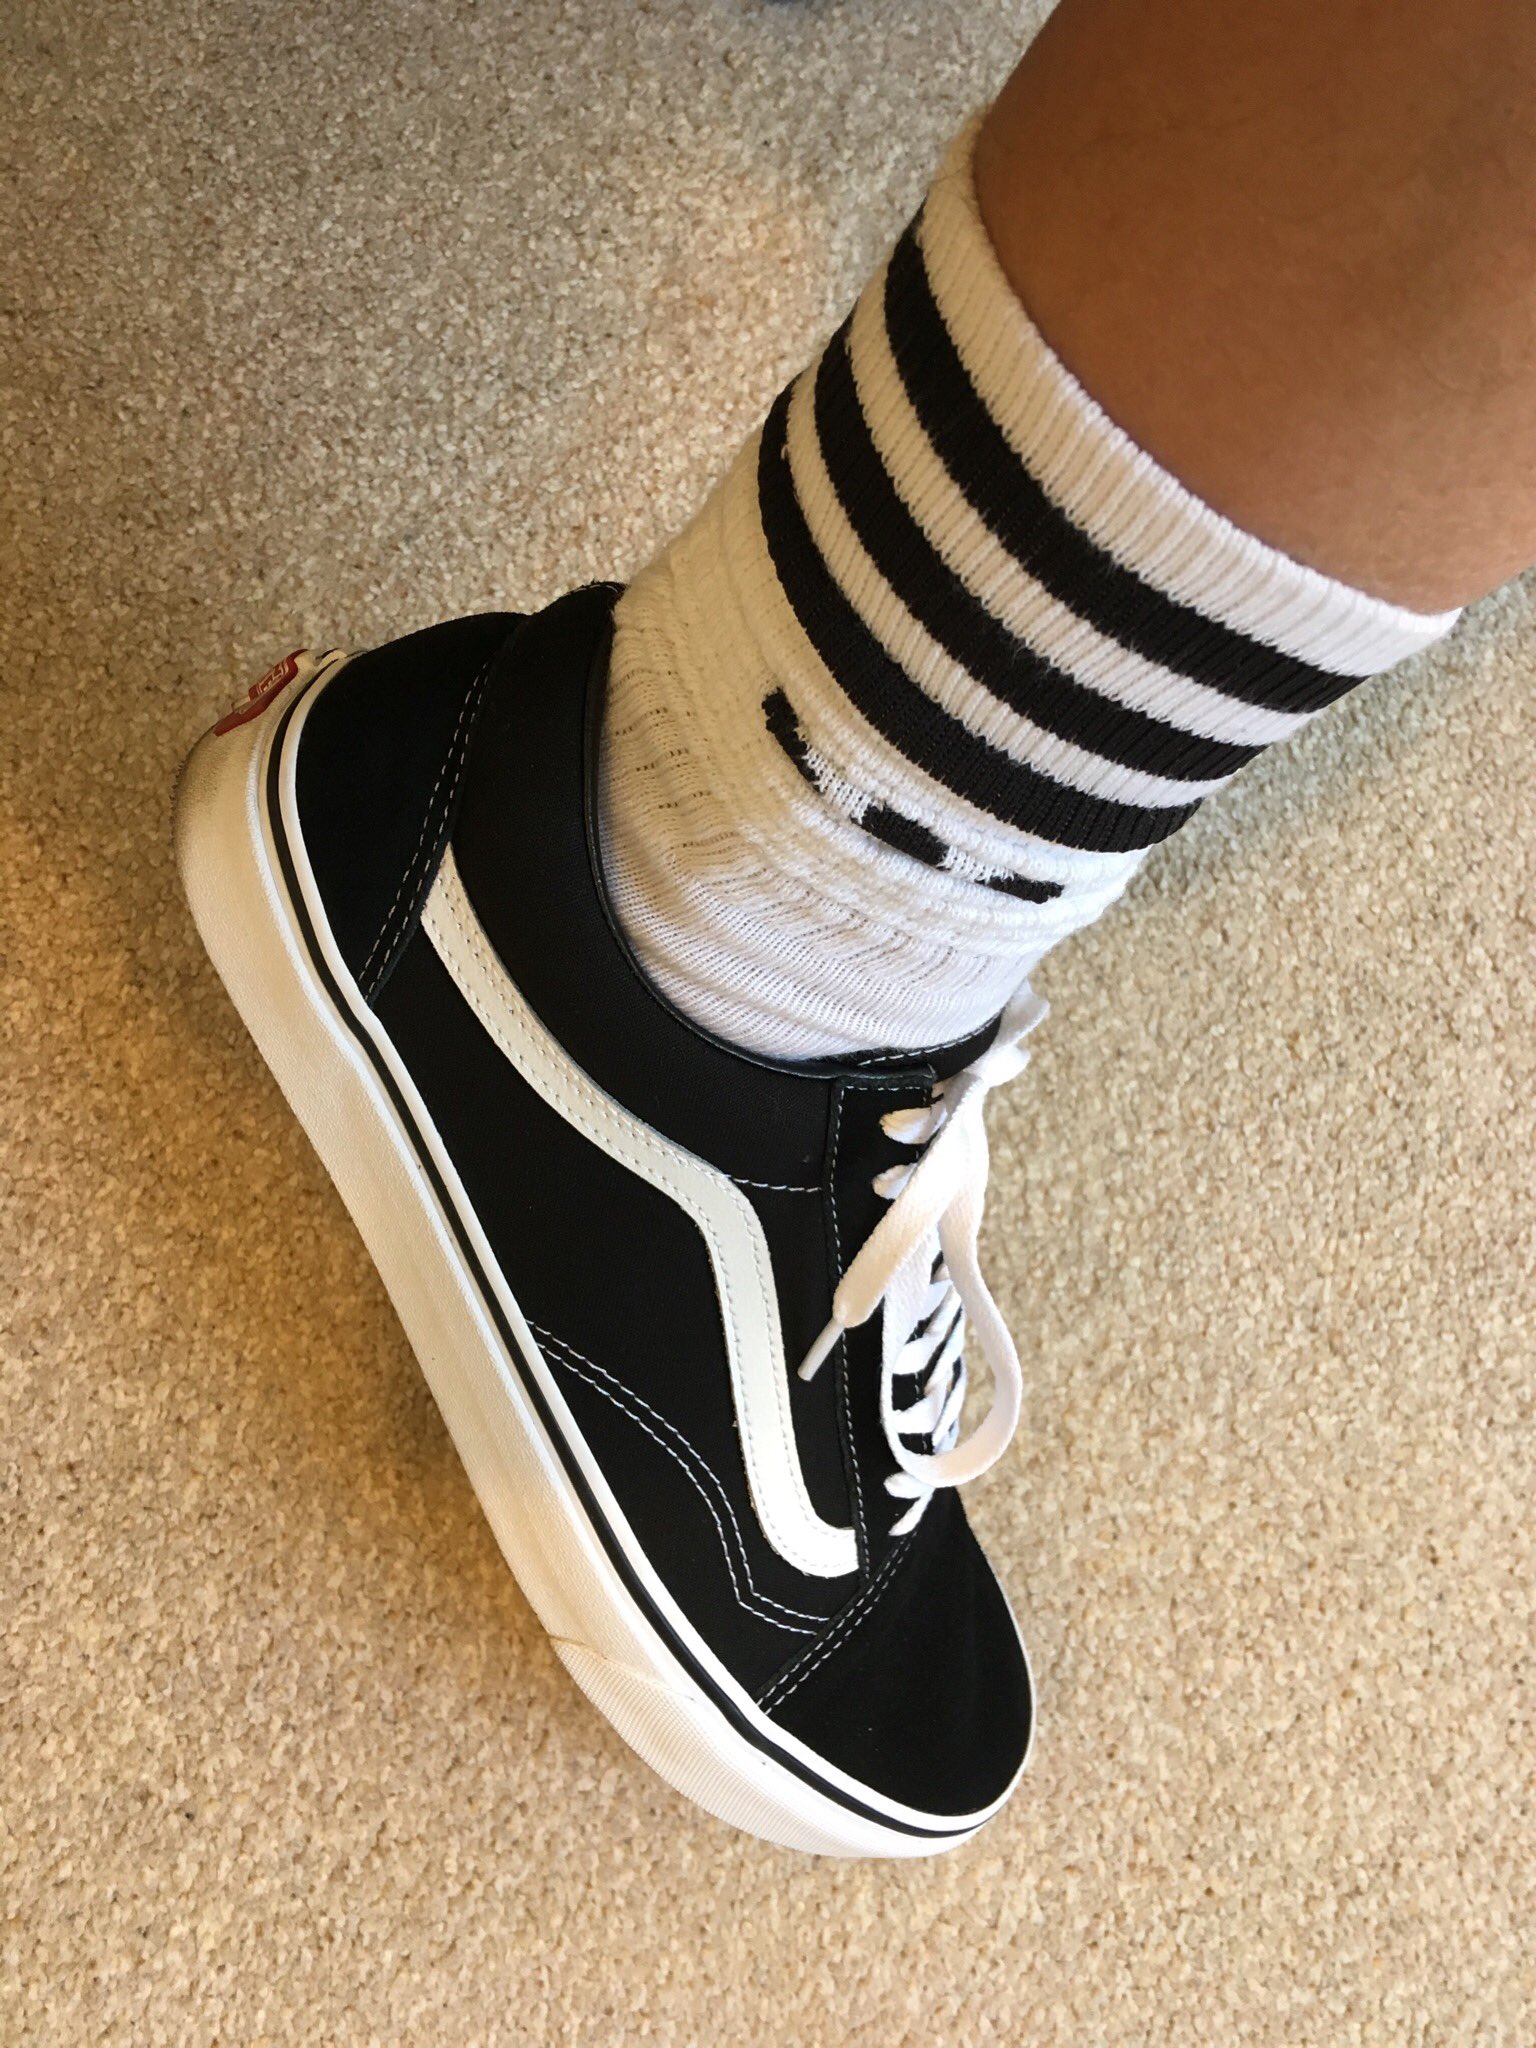 Lee 🇬🇧👟🧢🧦 on Twitter: "My mate @trainerboi23 said the new Adidas socks  would look good with Vans. I agree :) https://t.co/jqxSnqO7Nj" / Twitter